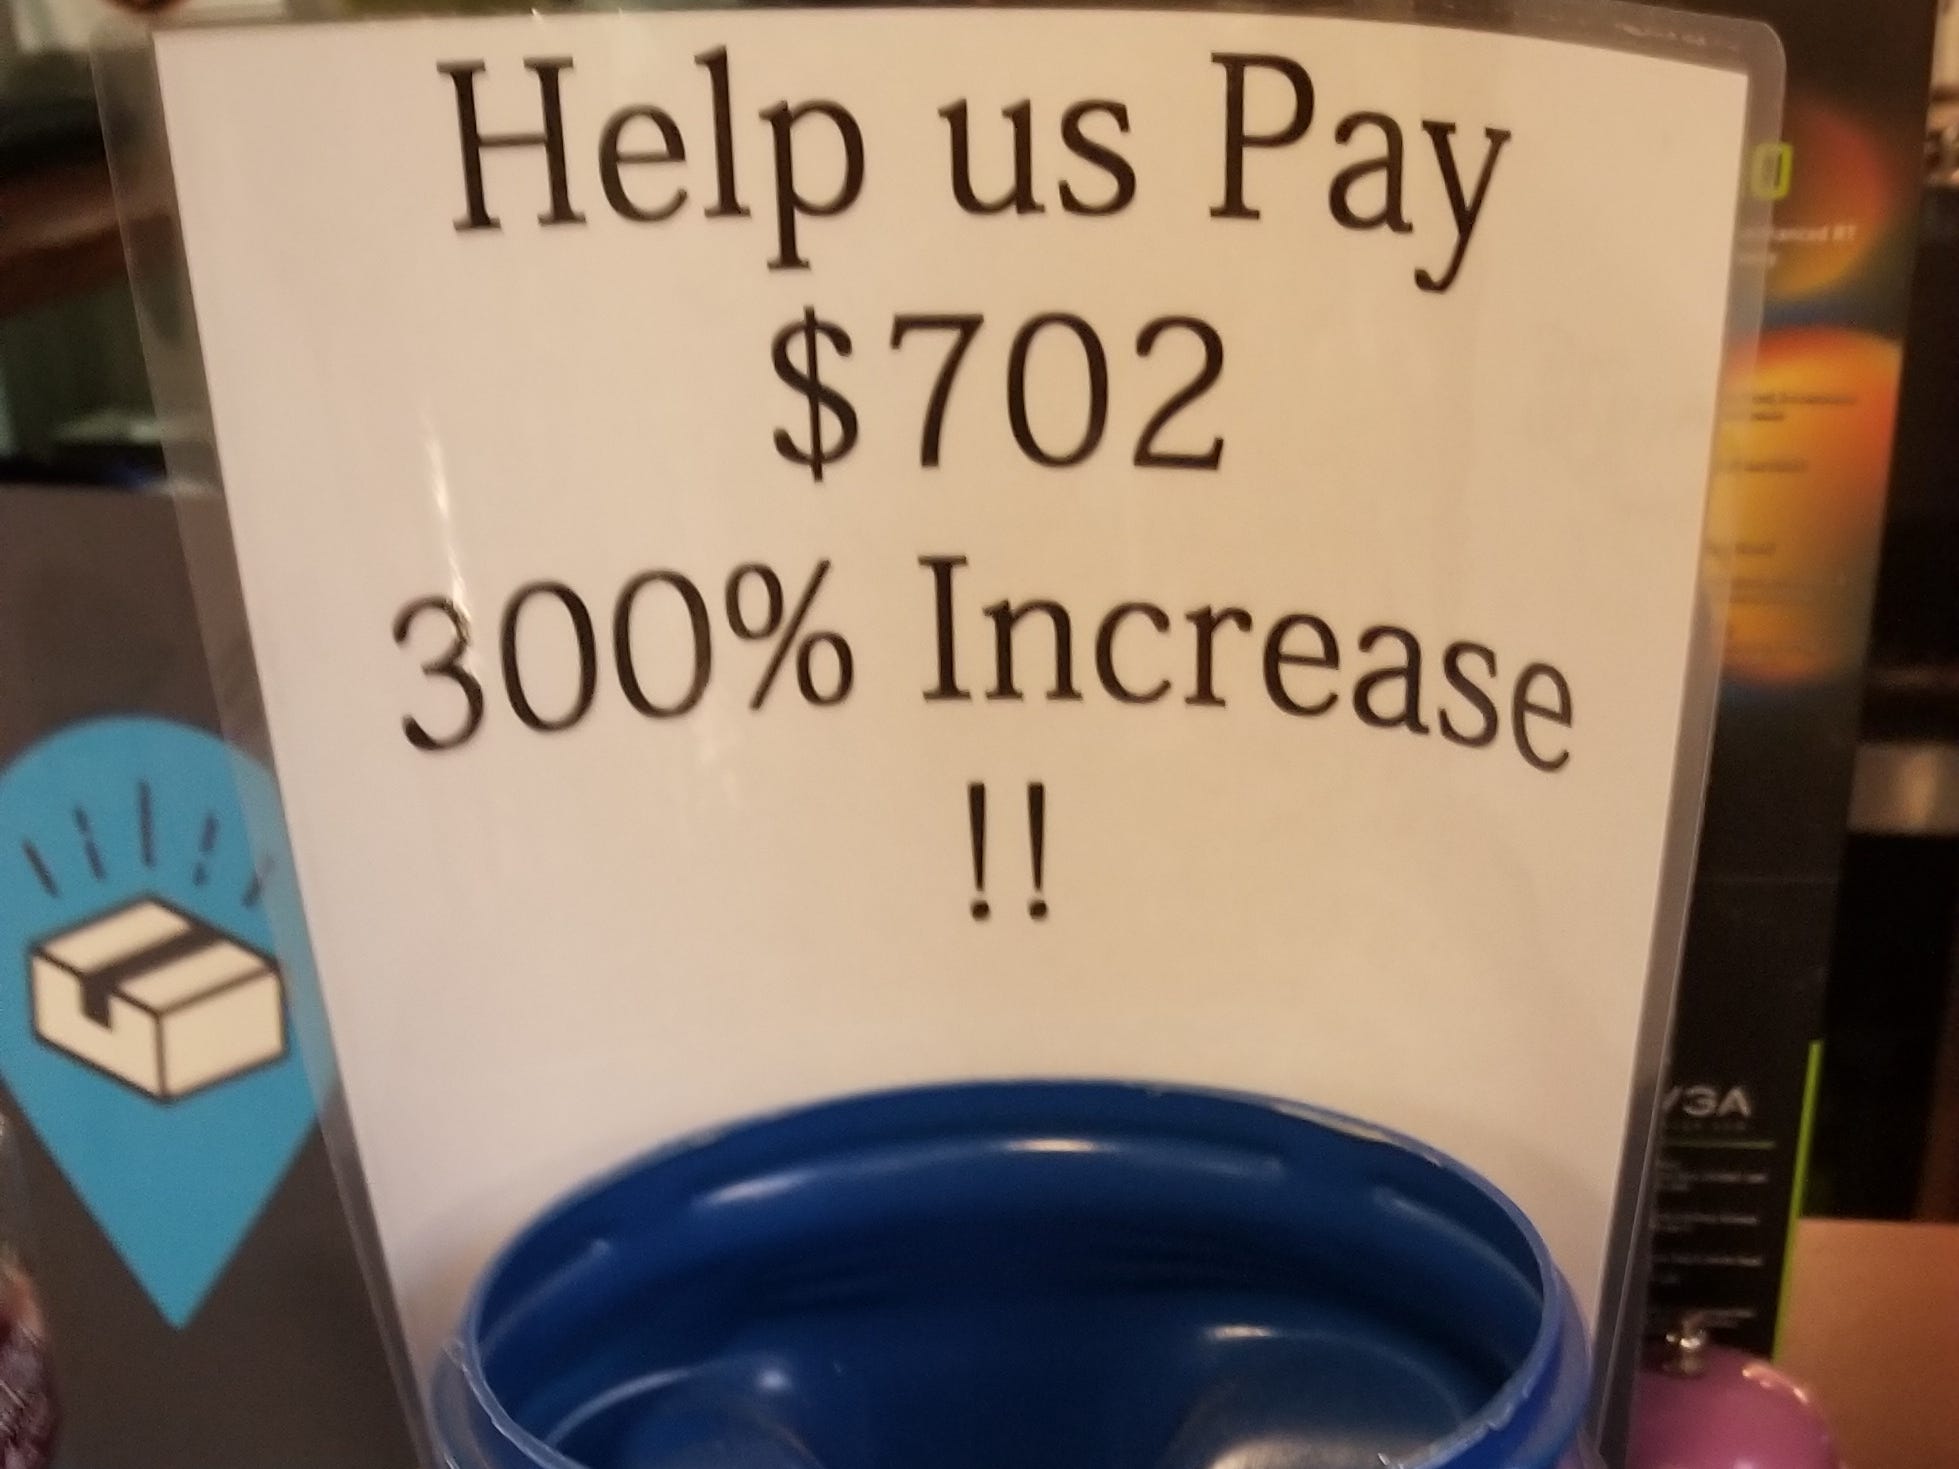 A blue plastic jar with Con Edison's logo on it, with a sign taped to it that says "Help us Pay $702 300% Increase!!"